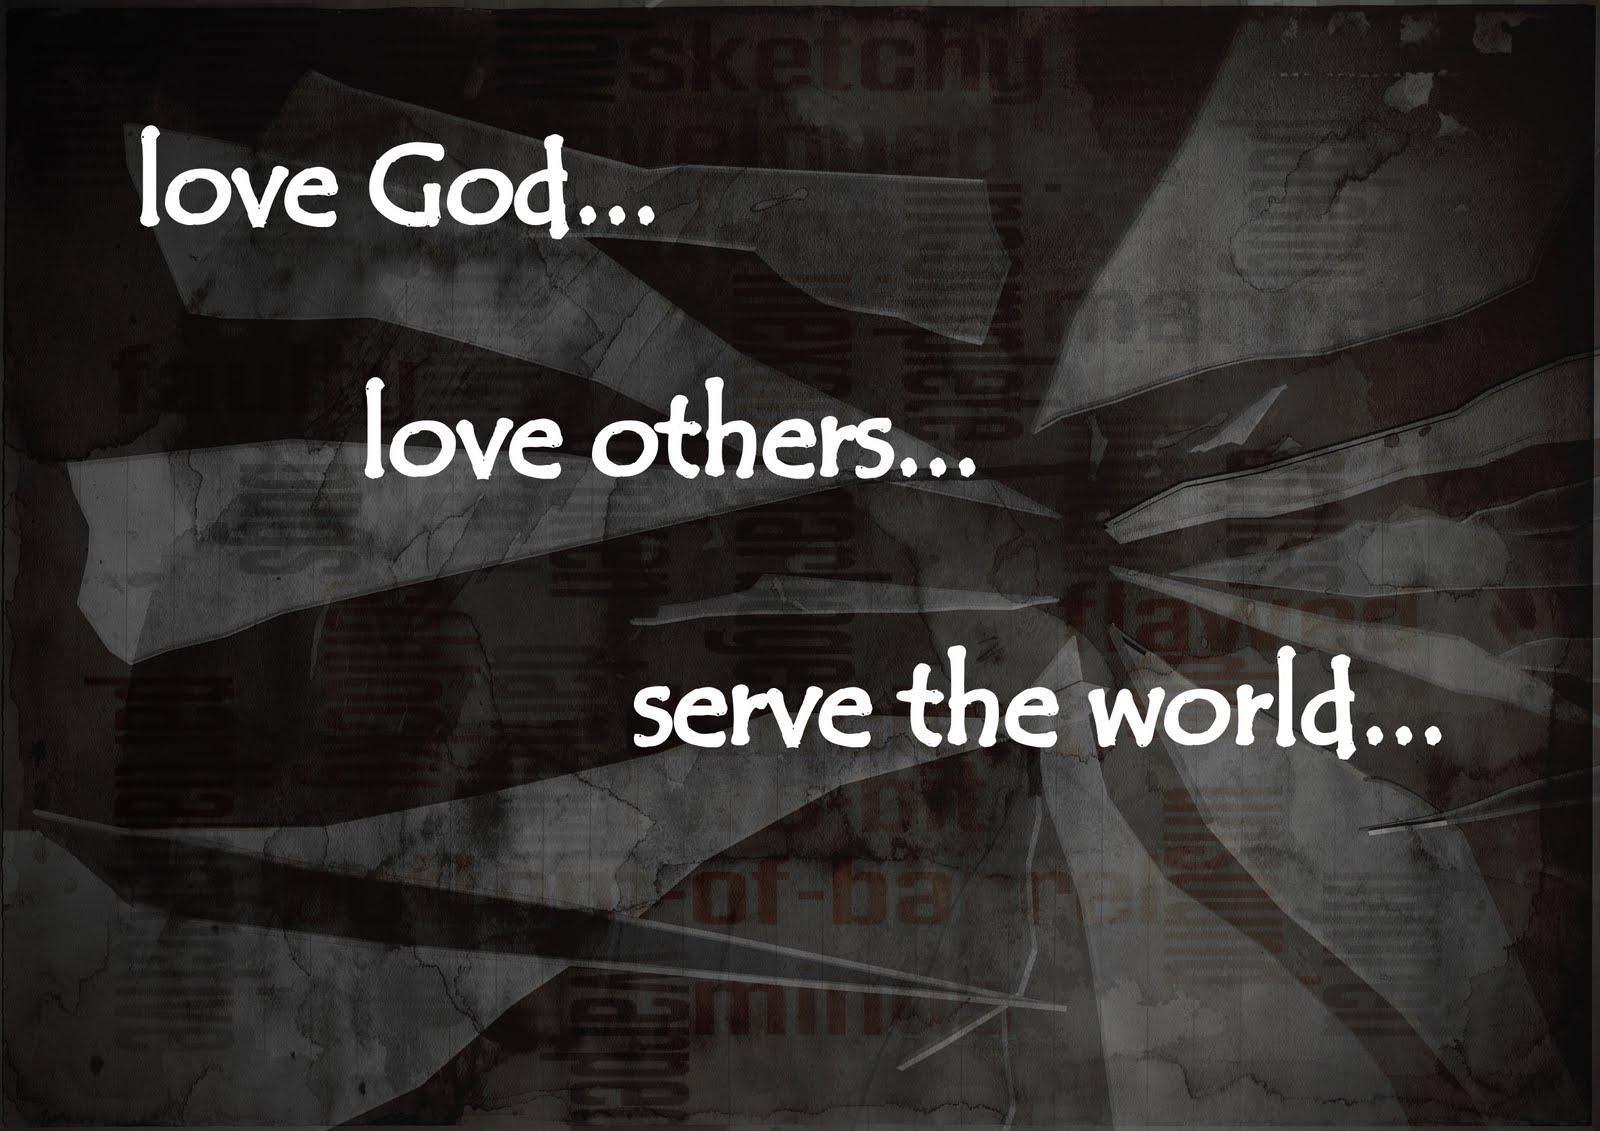 God Is Love Wallpapers